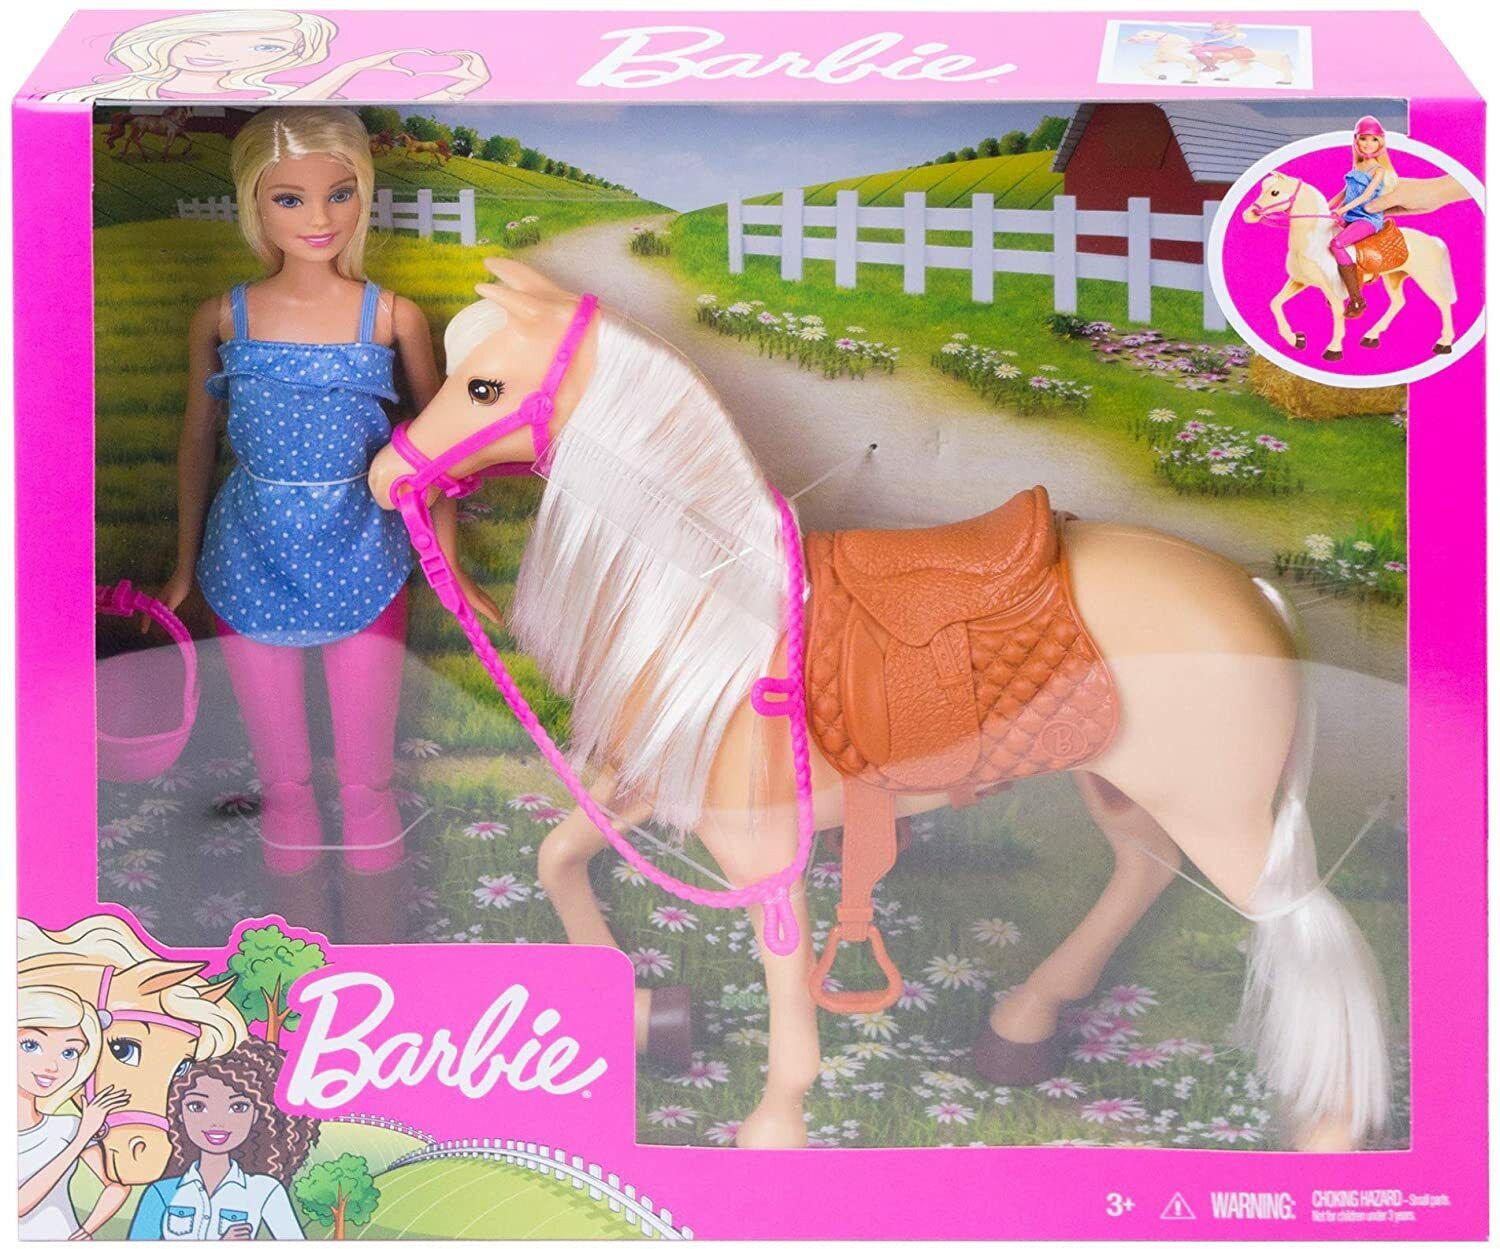 Barbie Doll & Horse Playset, Blonde Hair with Riding Accessories FXH13 GIFT NEW